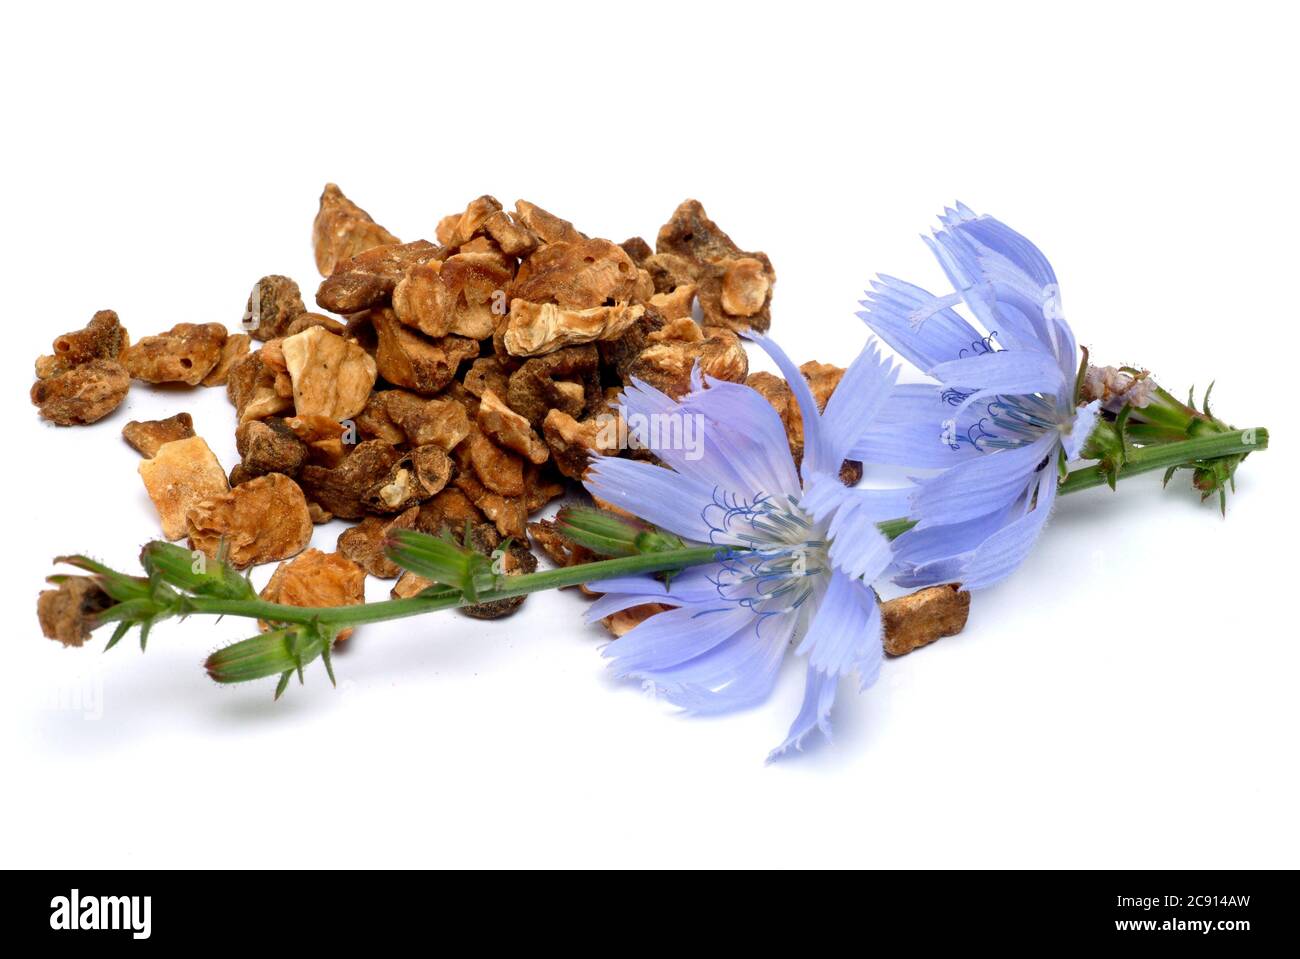 Dried root. Common or Common chicory, Cichorium intybus, and chicory. This plant has been used since the Middle Ages the manufacture of medicines. In Stock Photo